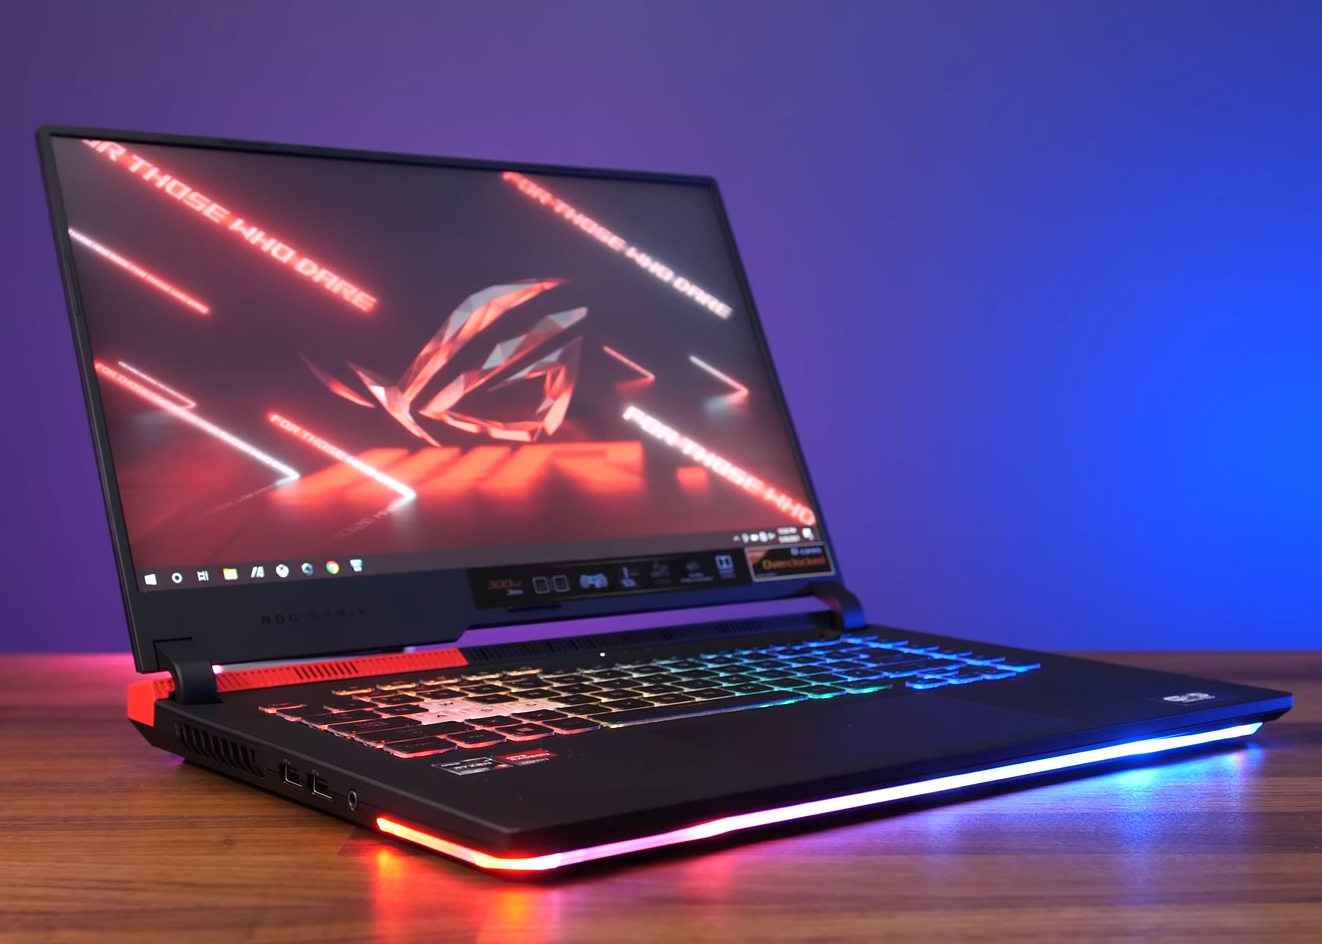 The Asus ROG STRIX G15 laptop with Radeon RX 6800M cannot reach its true  gaming potential due to slower stock RAM and missing MUX switch -  NotebookCheck.net News